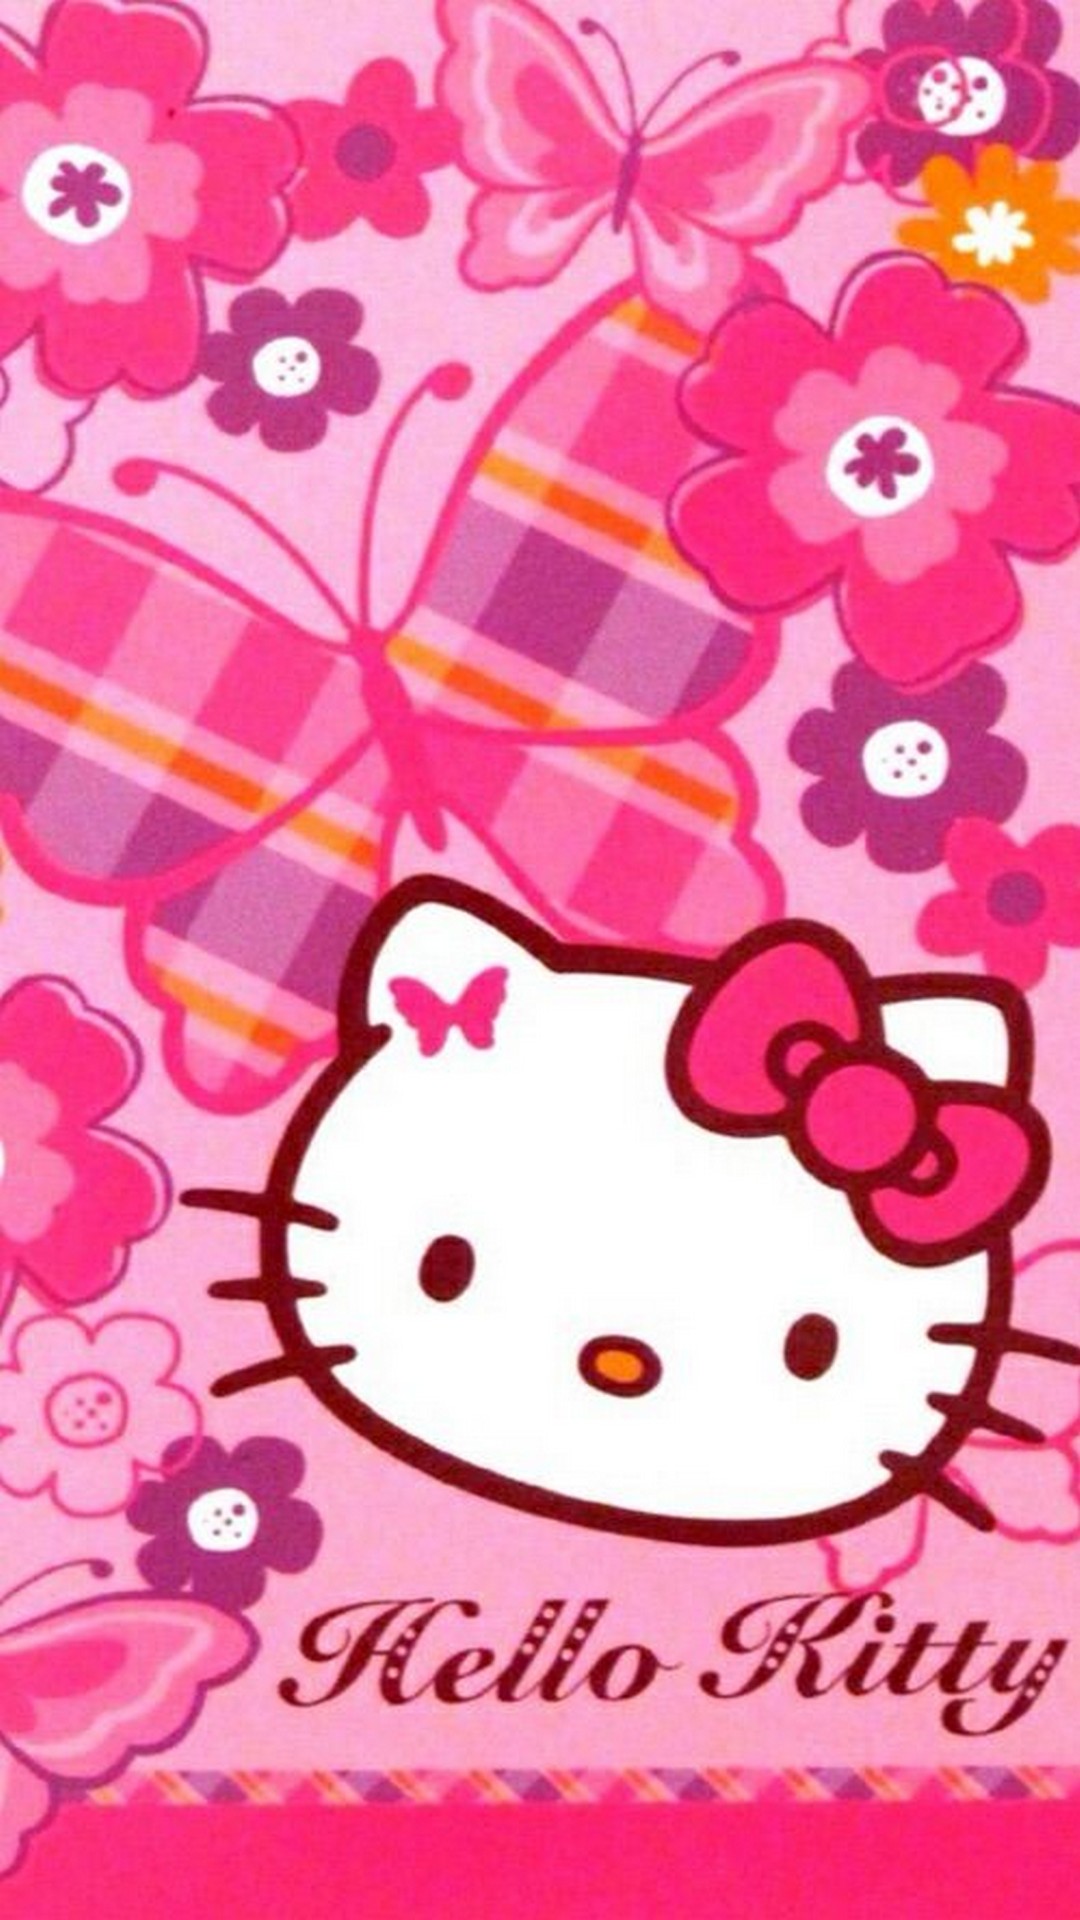 Sanrio Hello Kitty iPhone 7 Plus Wallpaper with resolution 1080X1920 pixel. You can use this wallpaper as background for your desktop Computer Screensavers, Android or iPhone smartphones